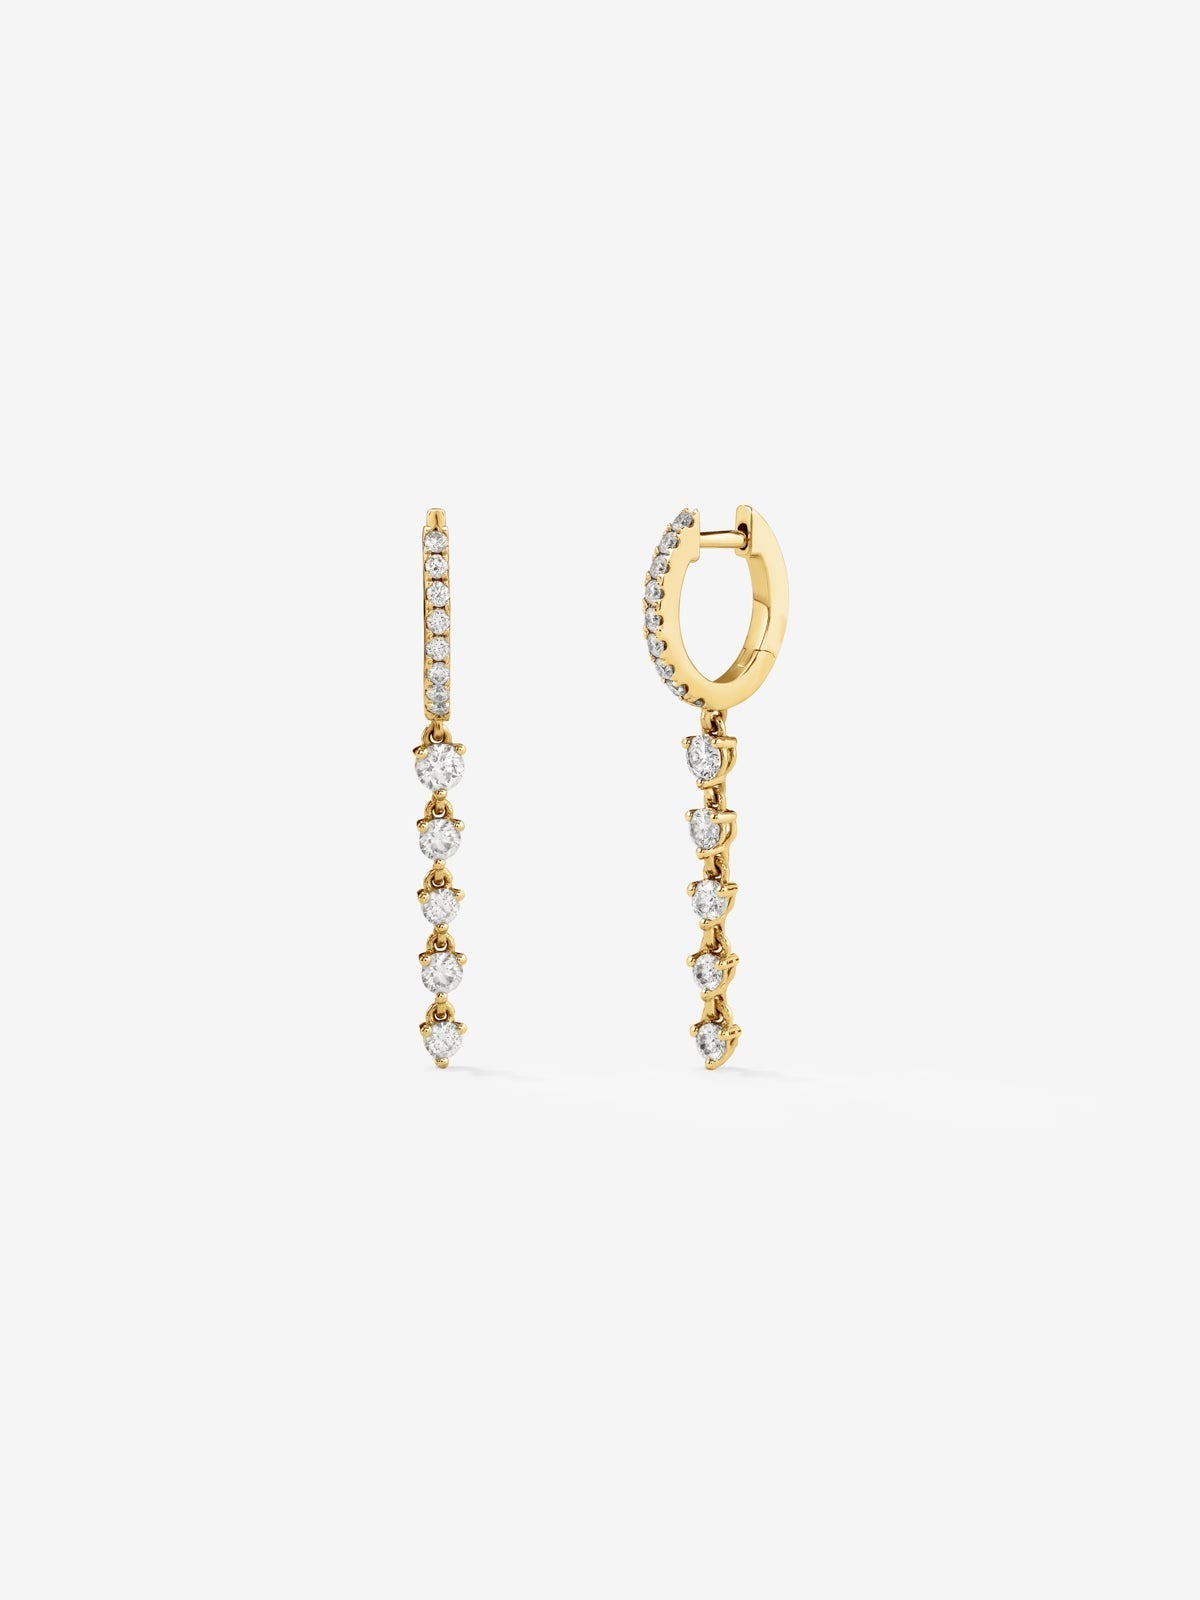 18K yellow gold earrings with 32 brilliant-cut diamonds with a total of 1.09 cts